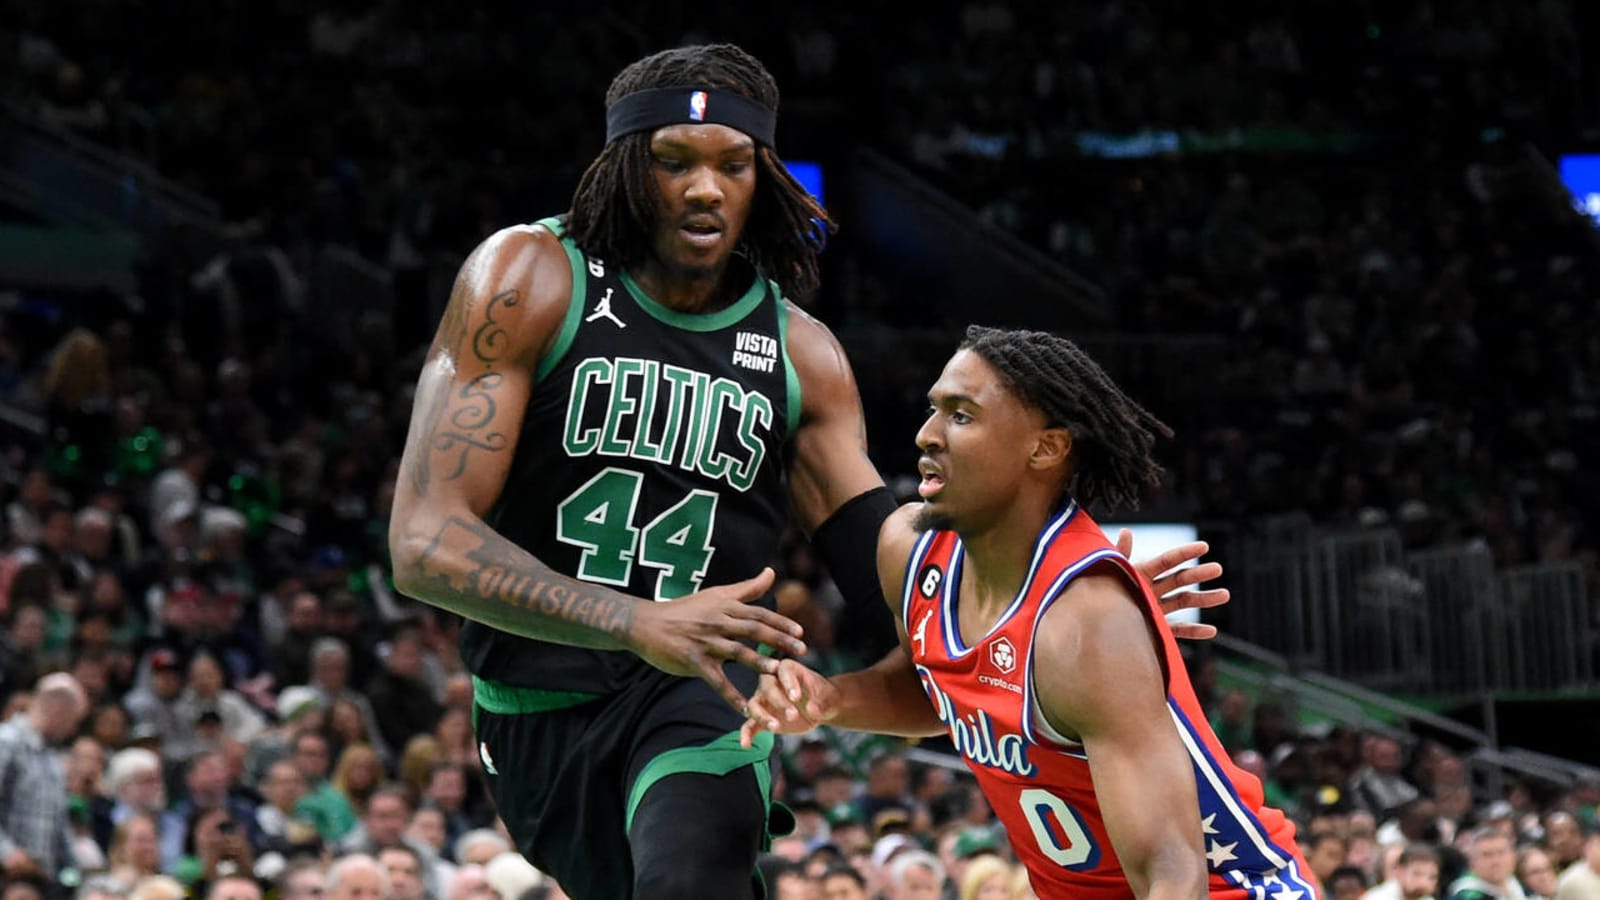 76ers forward had 'never seen' what happened near end of Celtics win